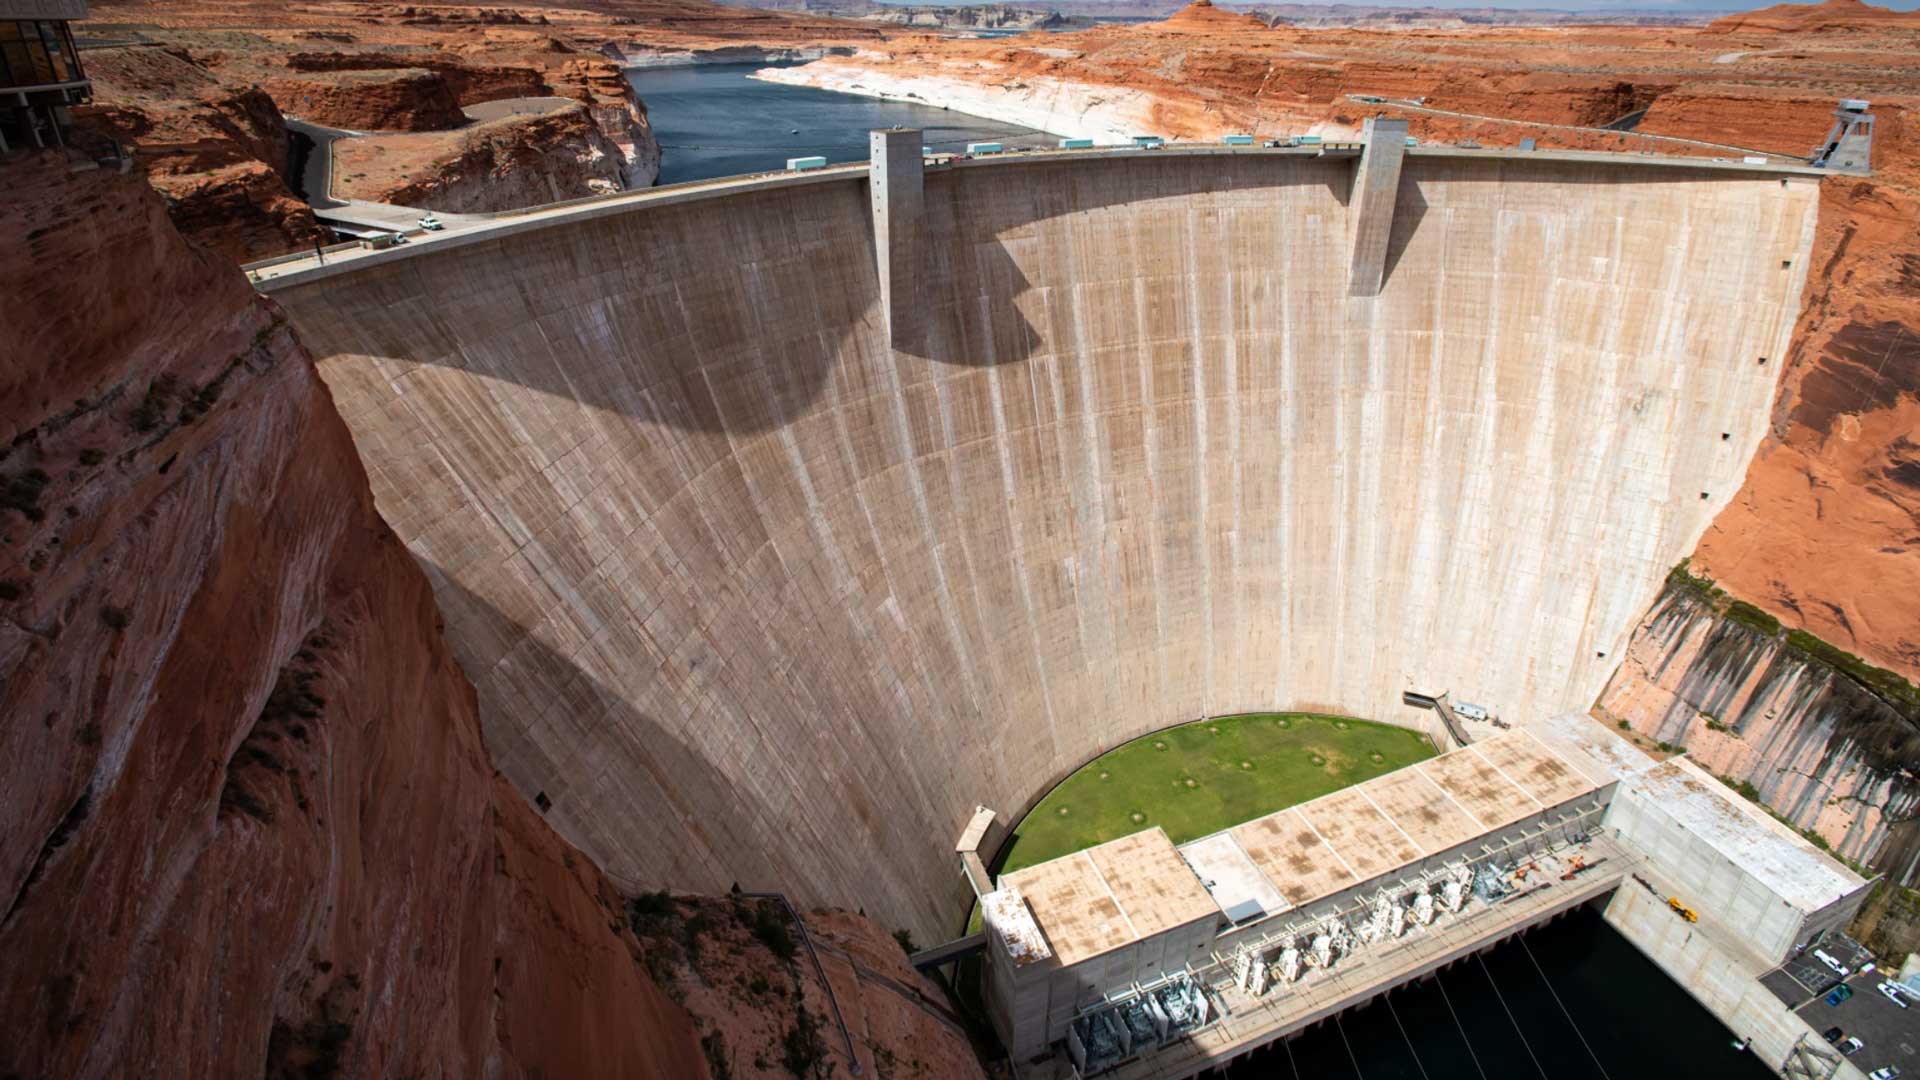 Feds want the ability to cut back on Colorado River reservoir releases over the next two years